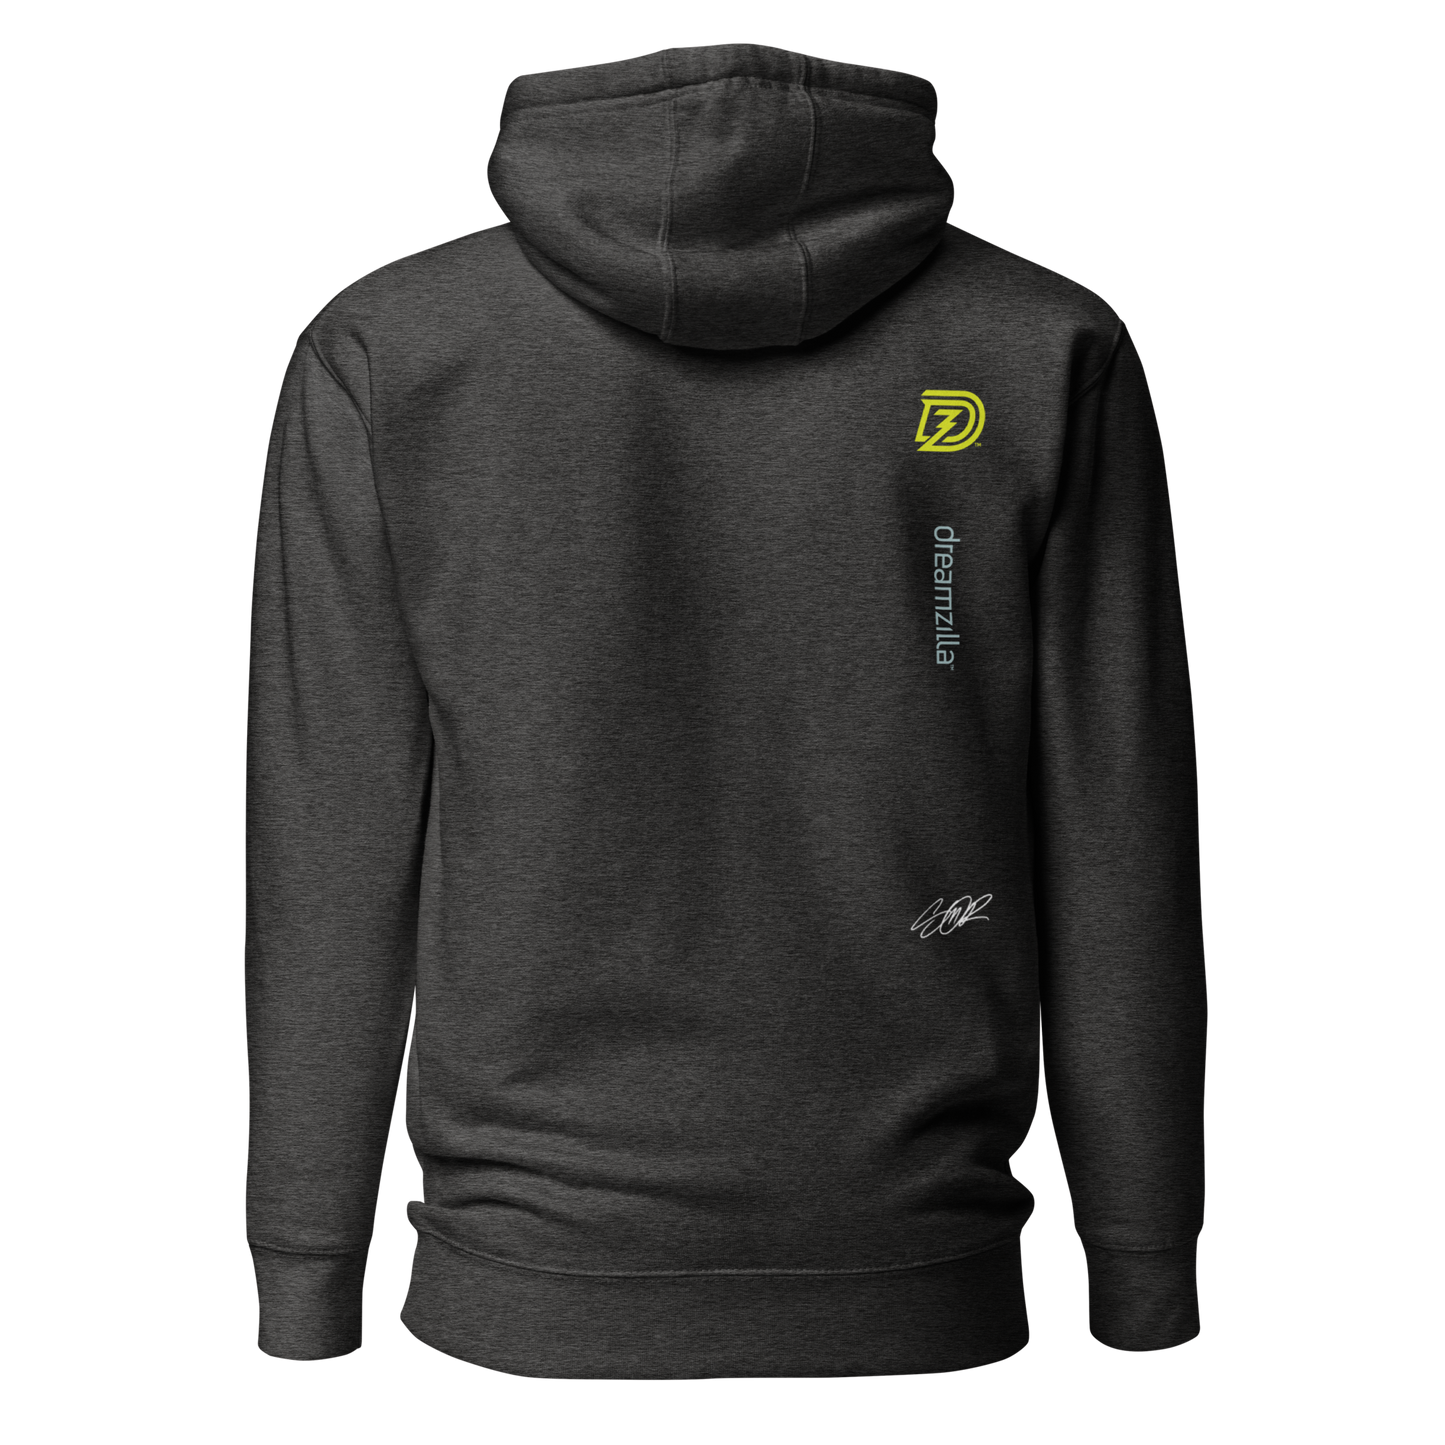 Back of Graffiti Wildstyle 2 by Sanitor Unisex Hoodie in Charcoal Heather